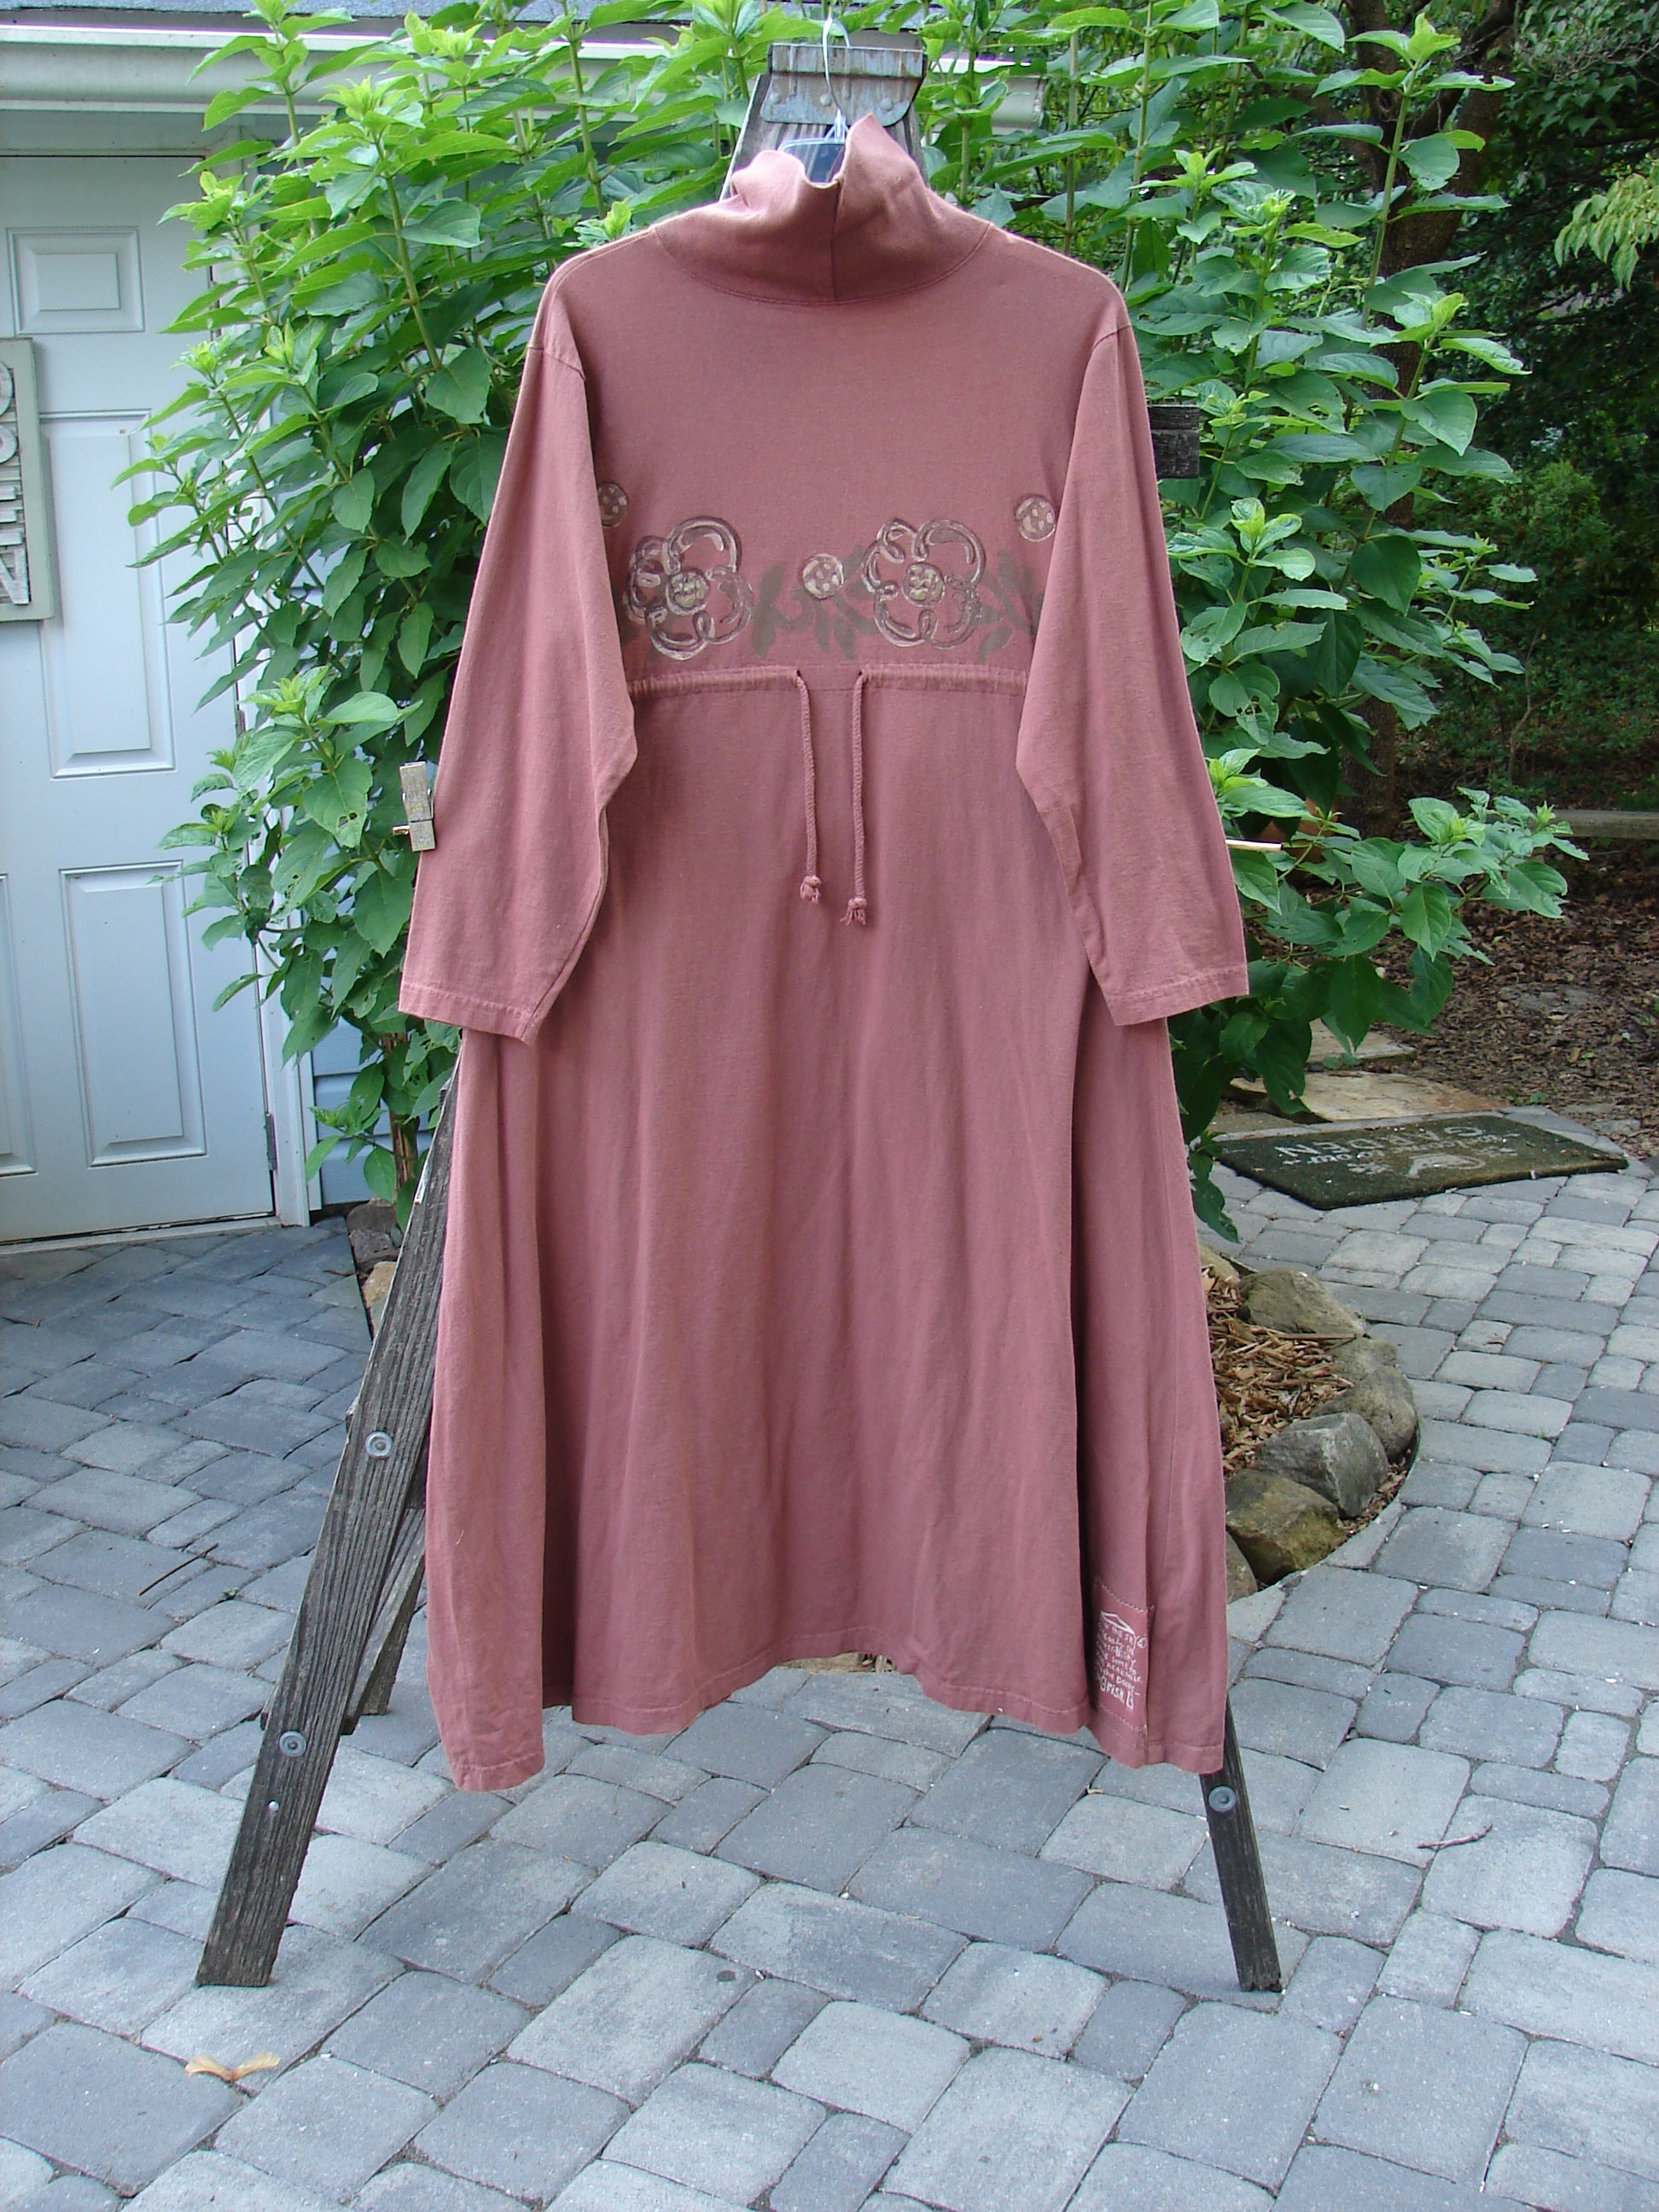 1995 Omega Dress Celestial Garden Altered Clove Size 1 on a stand, showcasing a heavy ribbed turtleneck, drop shoulders, A-line flare, and drawcord backline in organic cotton fabric.